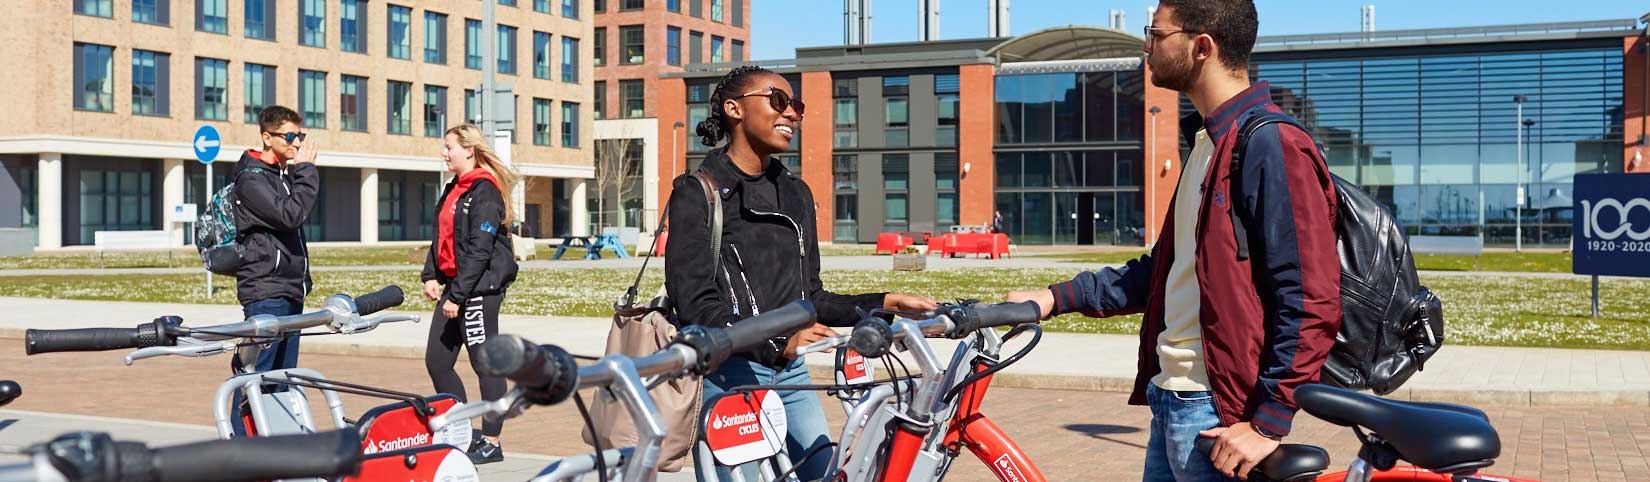 Two students chatting at the Santander Cycles docking station at the Bay Campus with Engineering Central building in the background.